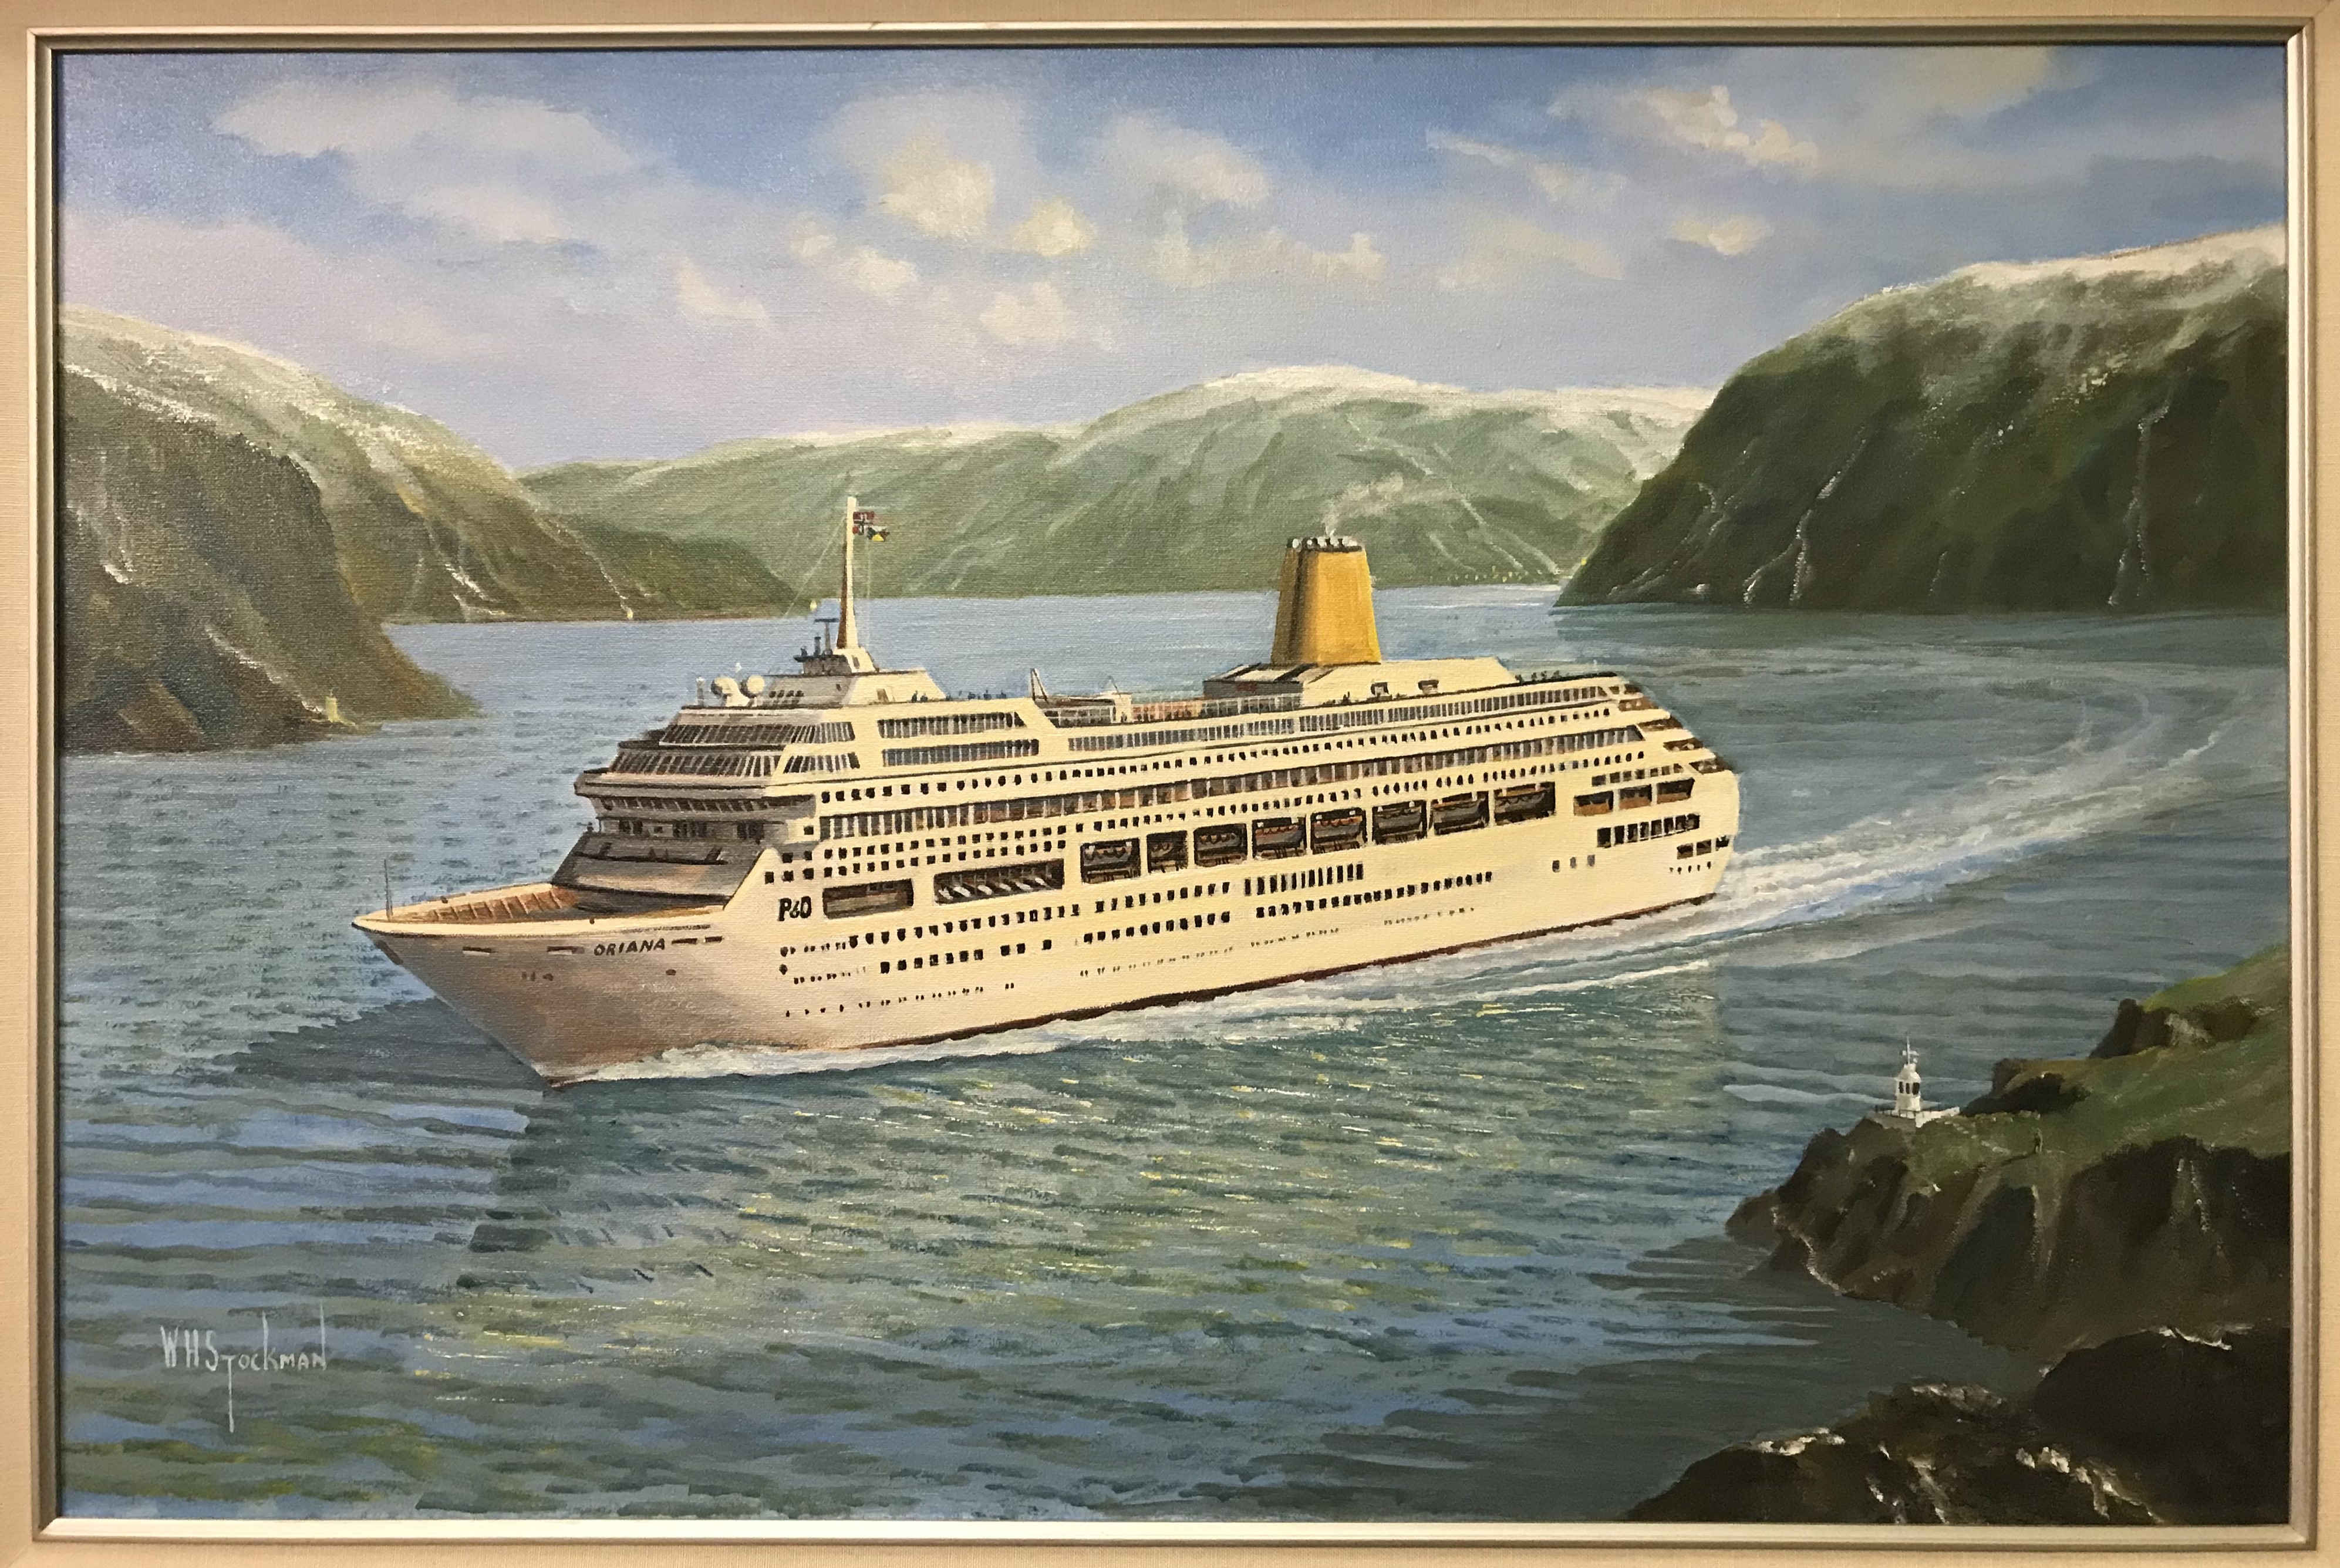 WILLIAM H STOCKMAN "Oriana" study of a cruise liner, oil on canvas, signed lower left,